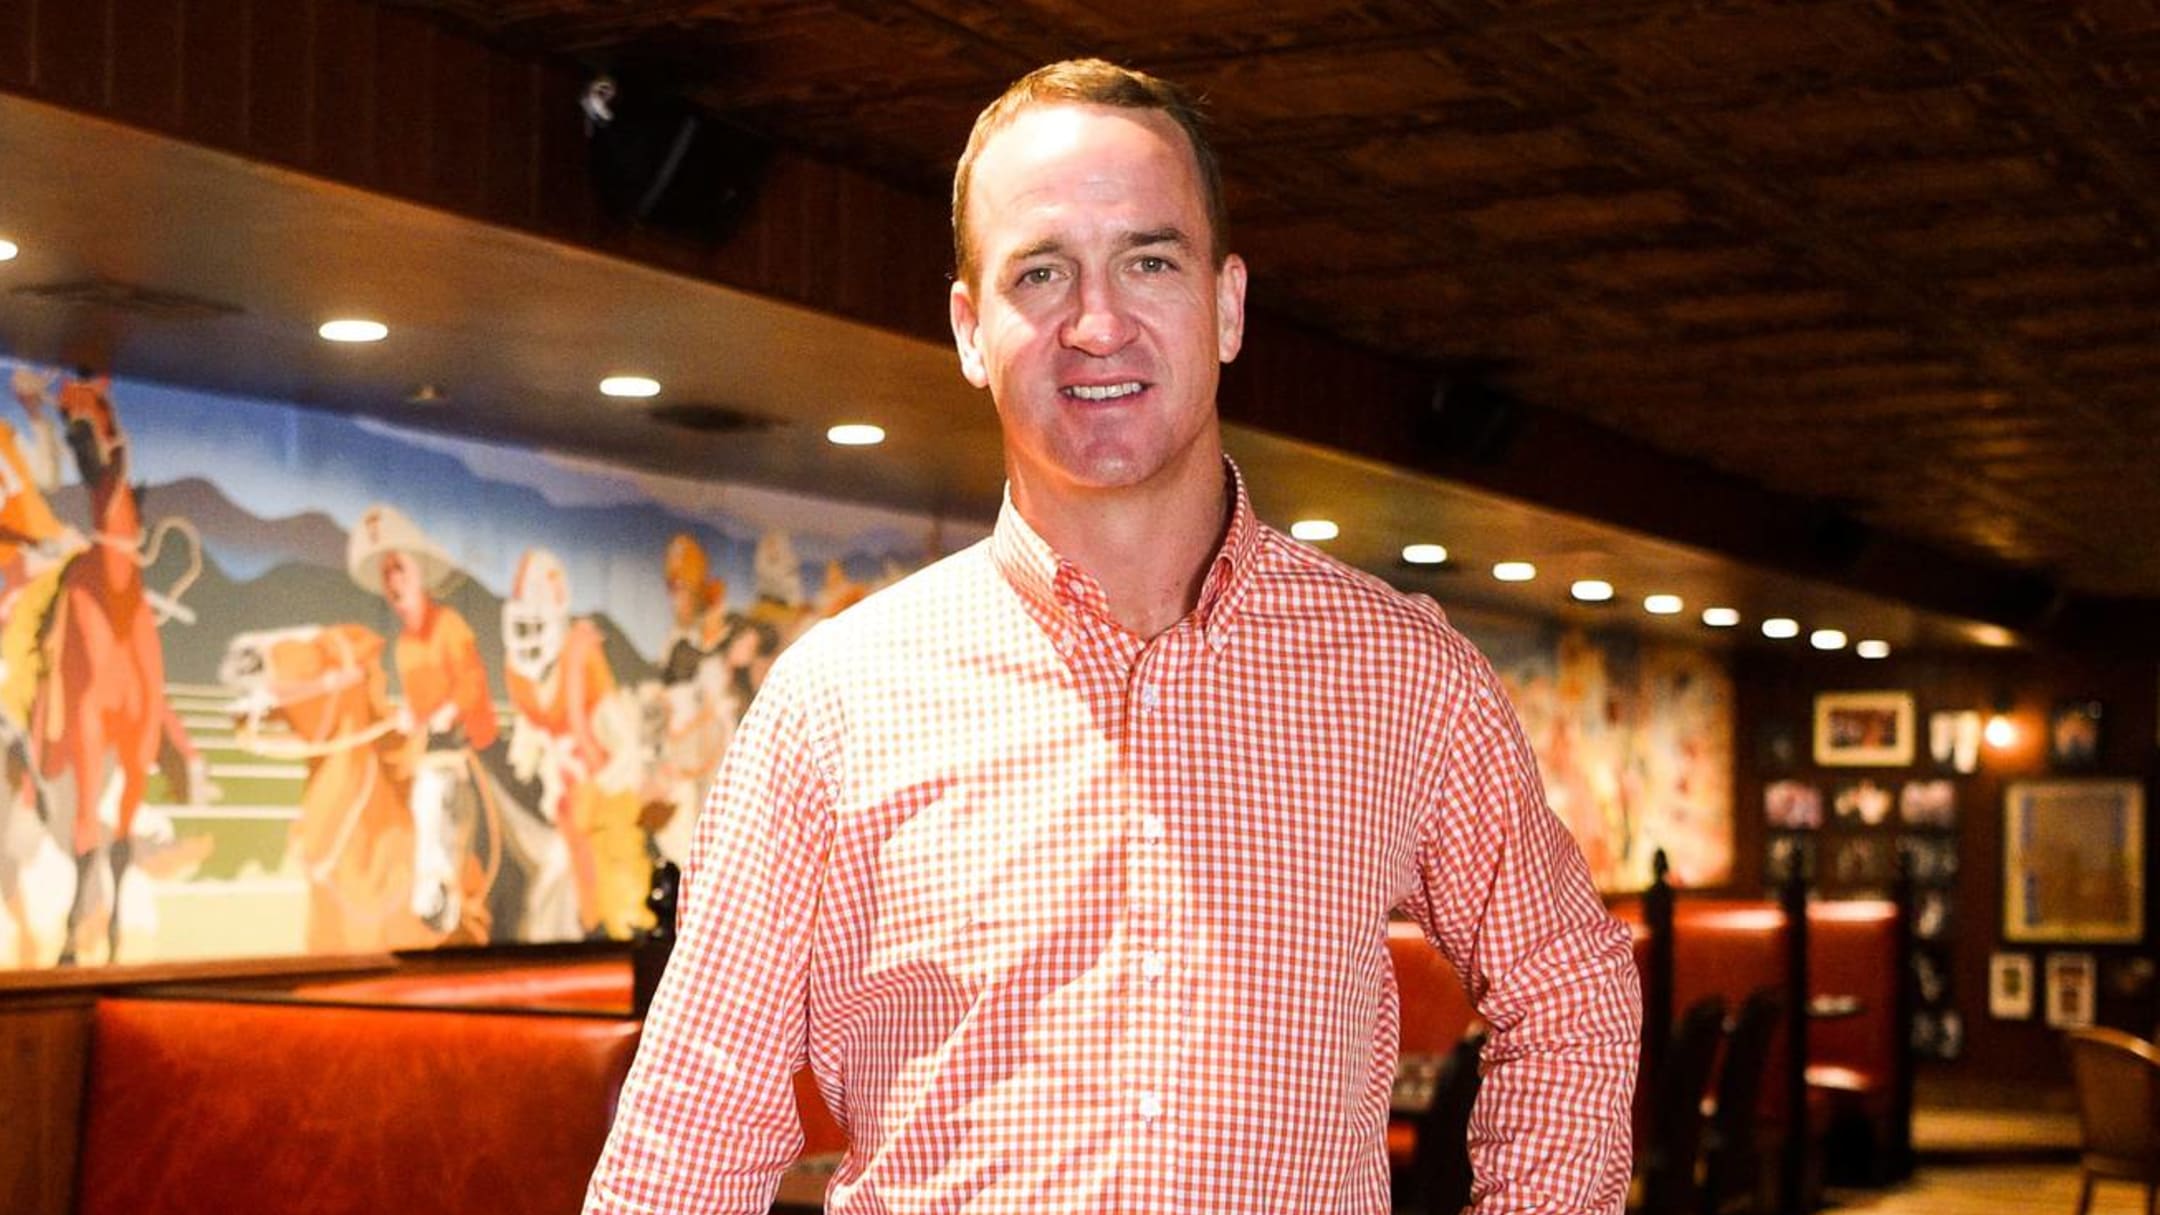 may pursue Hall of Famer Peyton Manning for TNF role